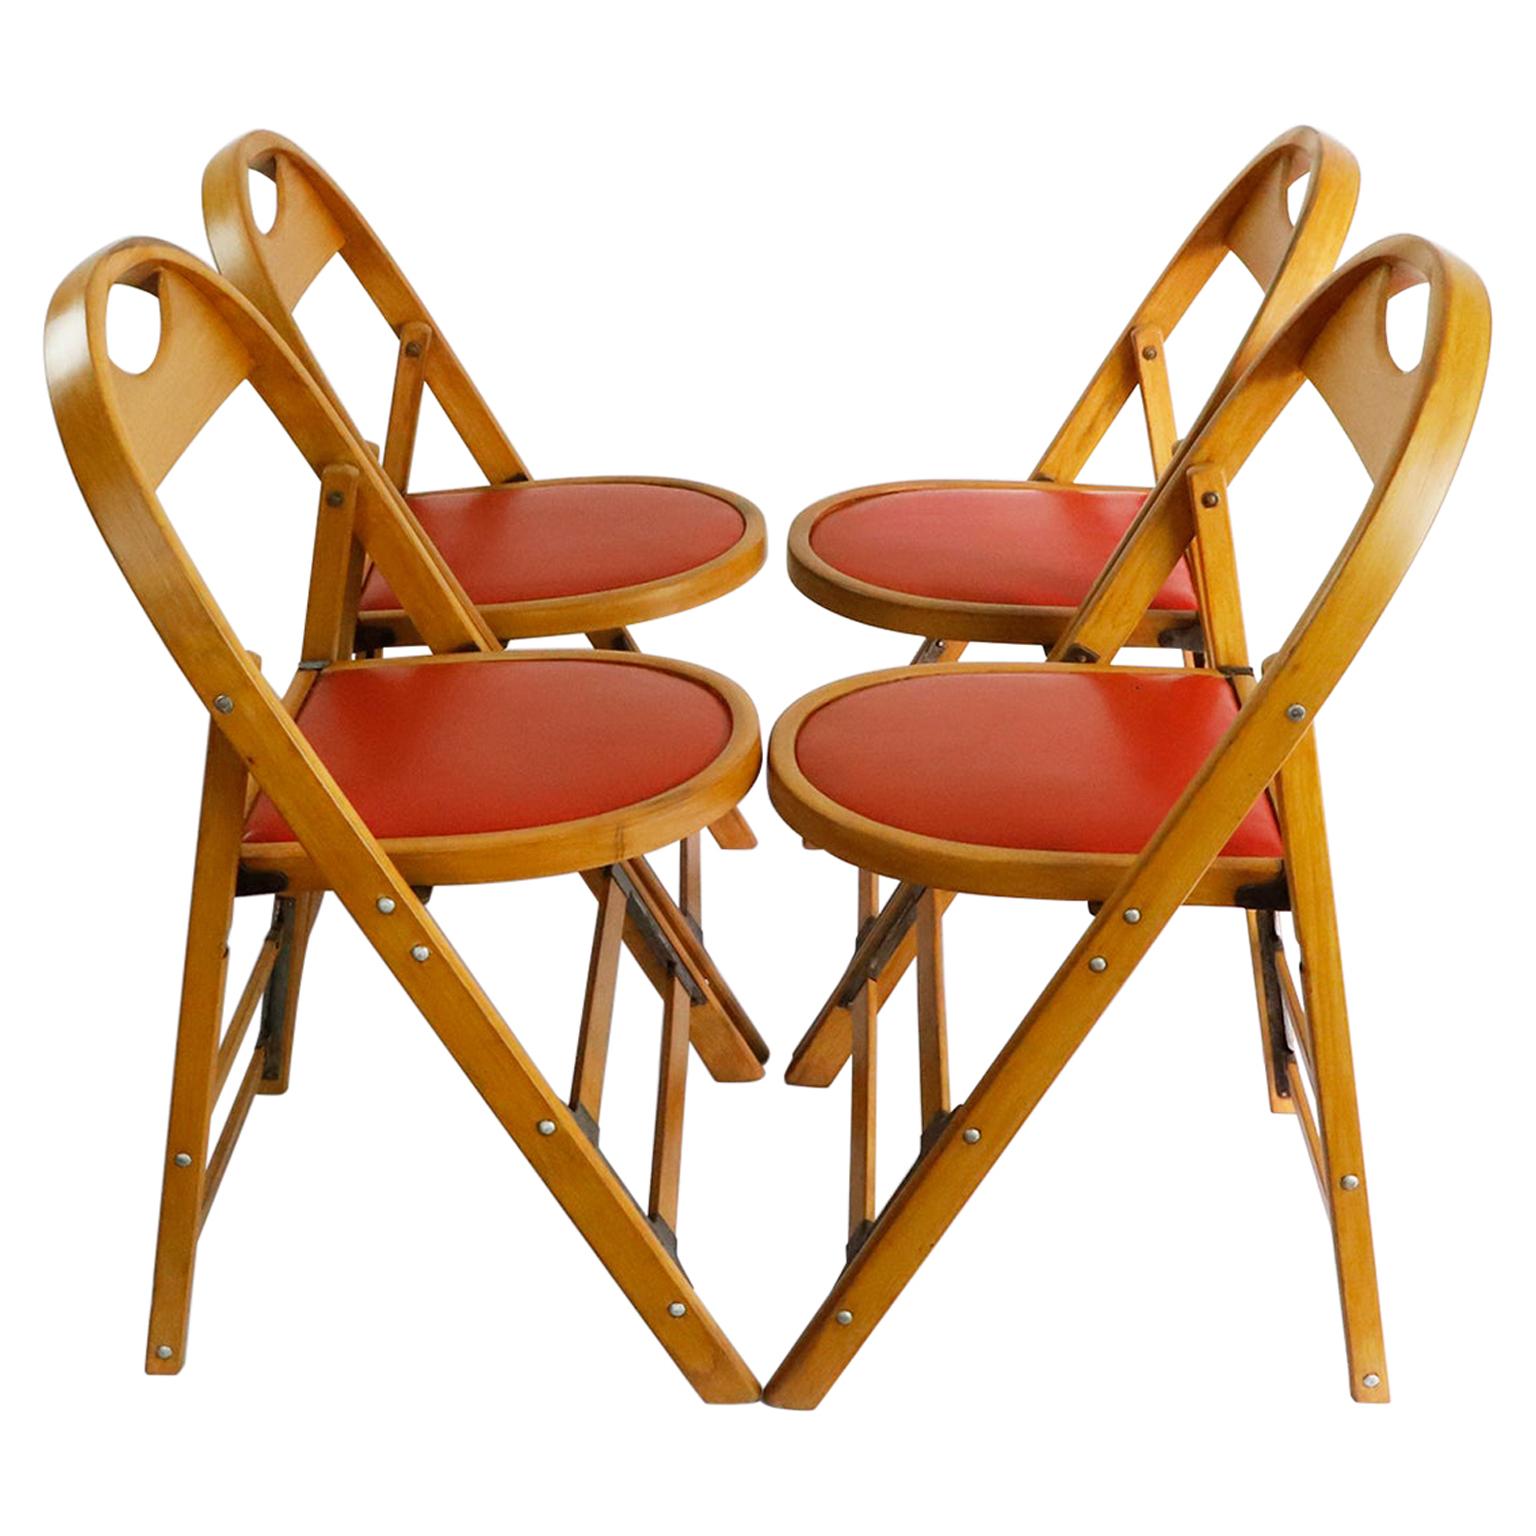 Set of Four Mexican Folding Chairs  by “Silleria La Malinche“